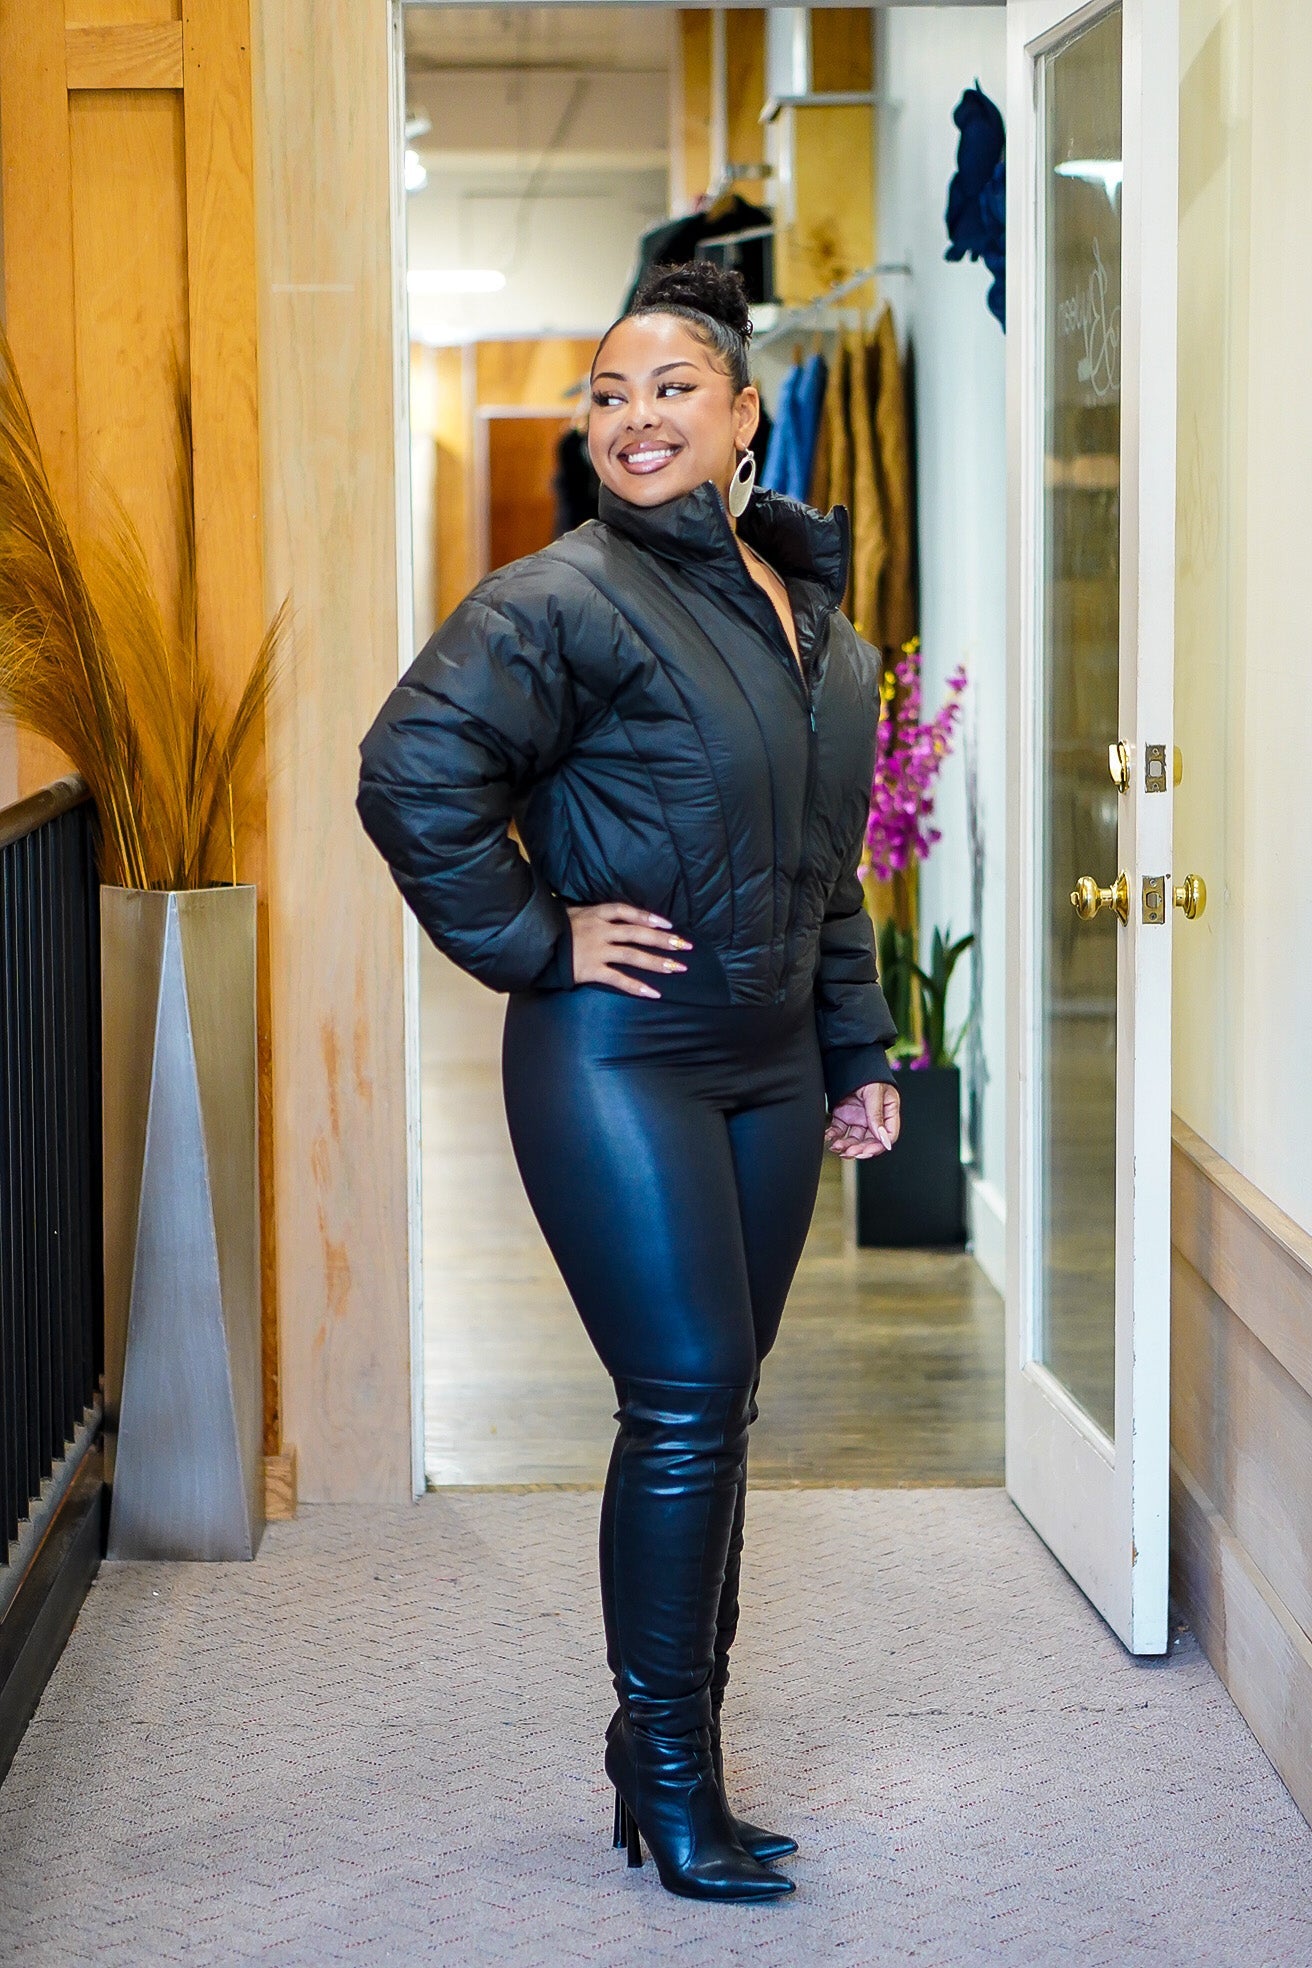 Zoey Puffer Crop Jacket (Black) - Avail in Plus Size